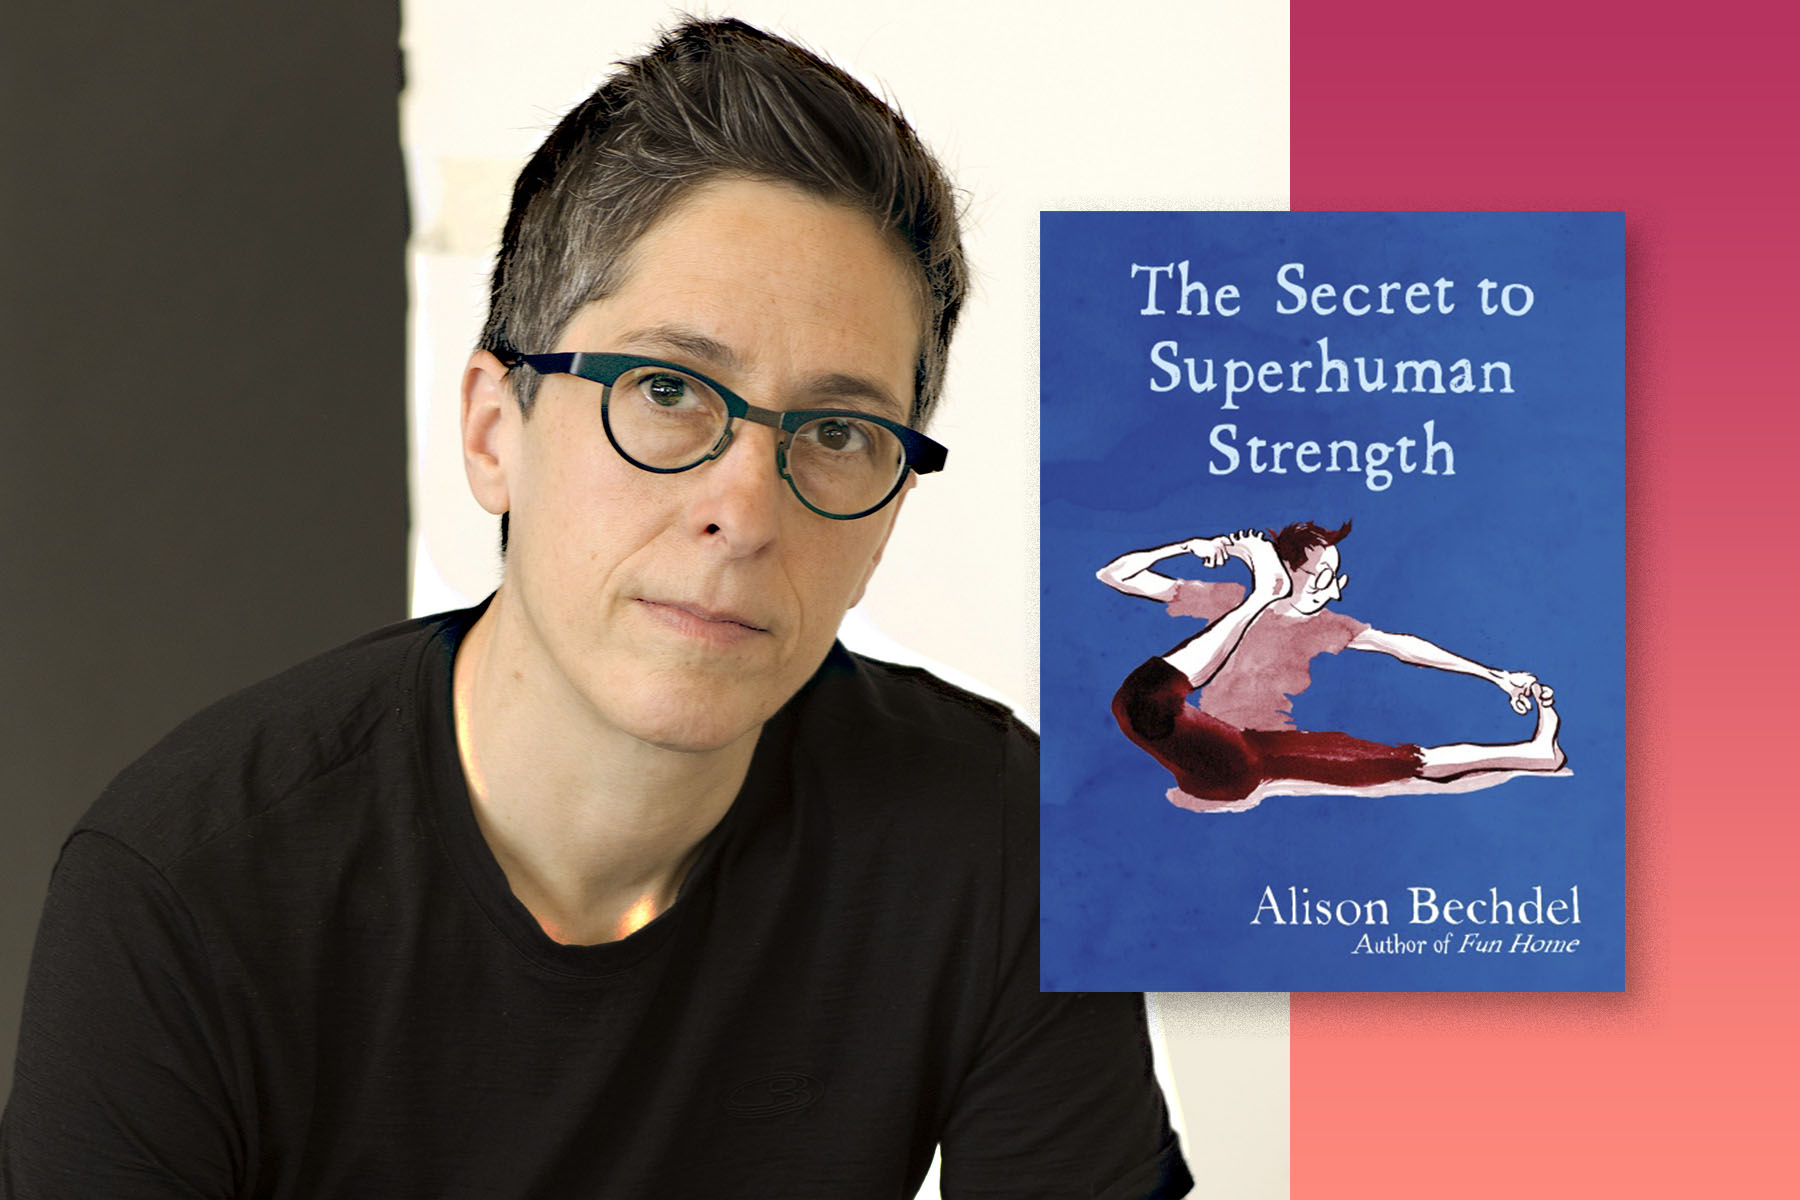 A photograph of Allison Bechdel next to an overlay of her book The Secret to Superhuman Strength